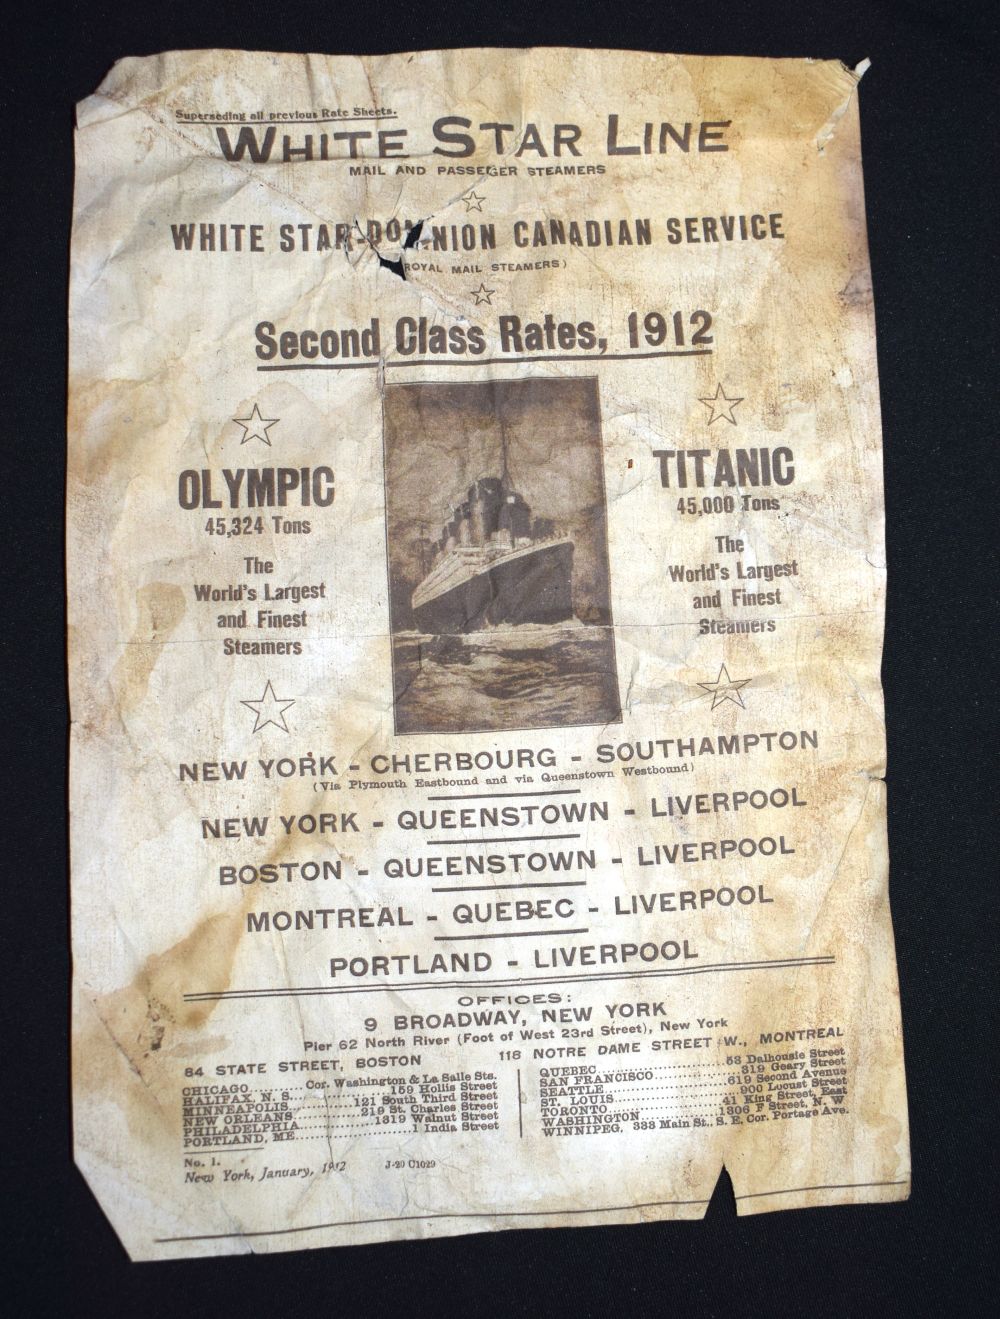 A collection of Titanic ephemera copy of The Daily Mirror, Poster, White Star line advertisement, - Image 13 of 14